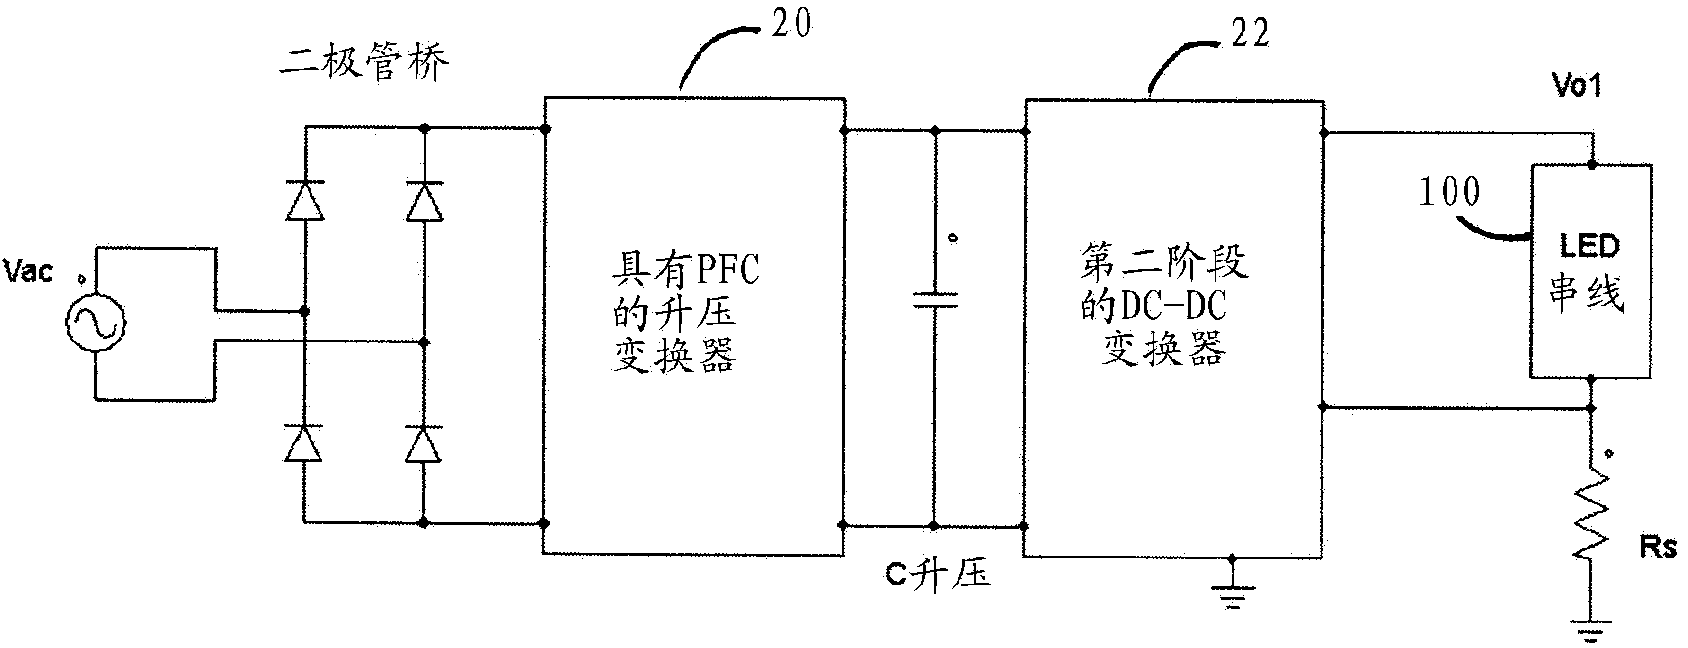 Ripple cancellation converter with high power factor